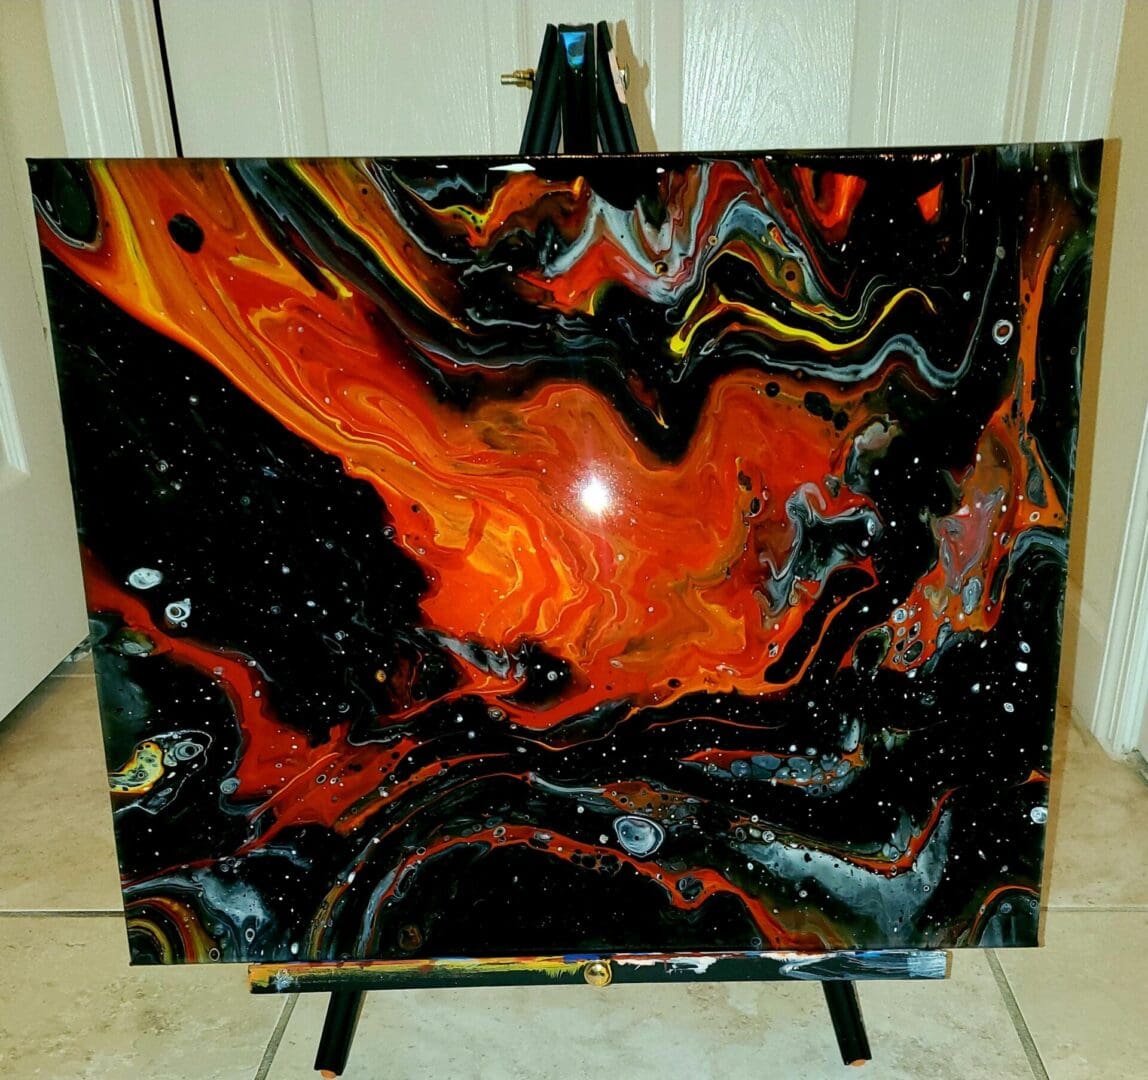 A painting of fire and black paint on the floor